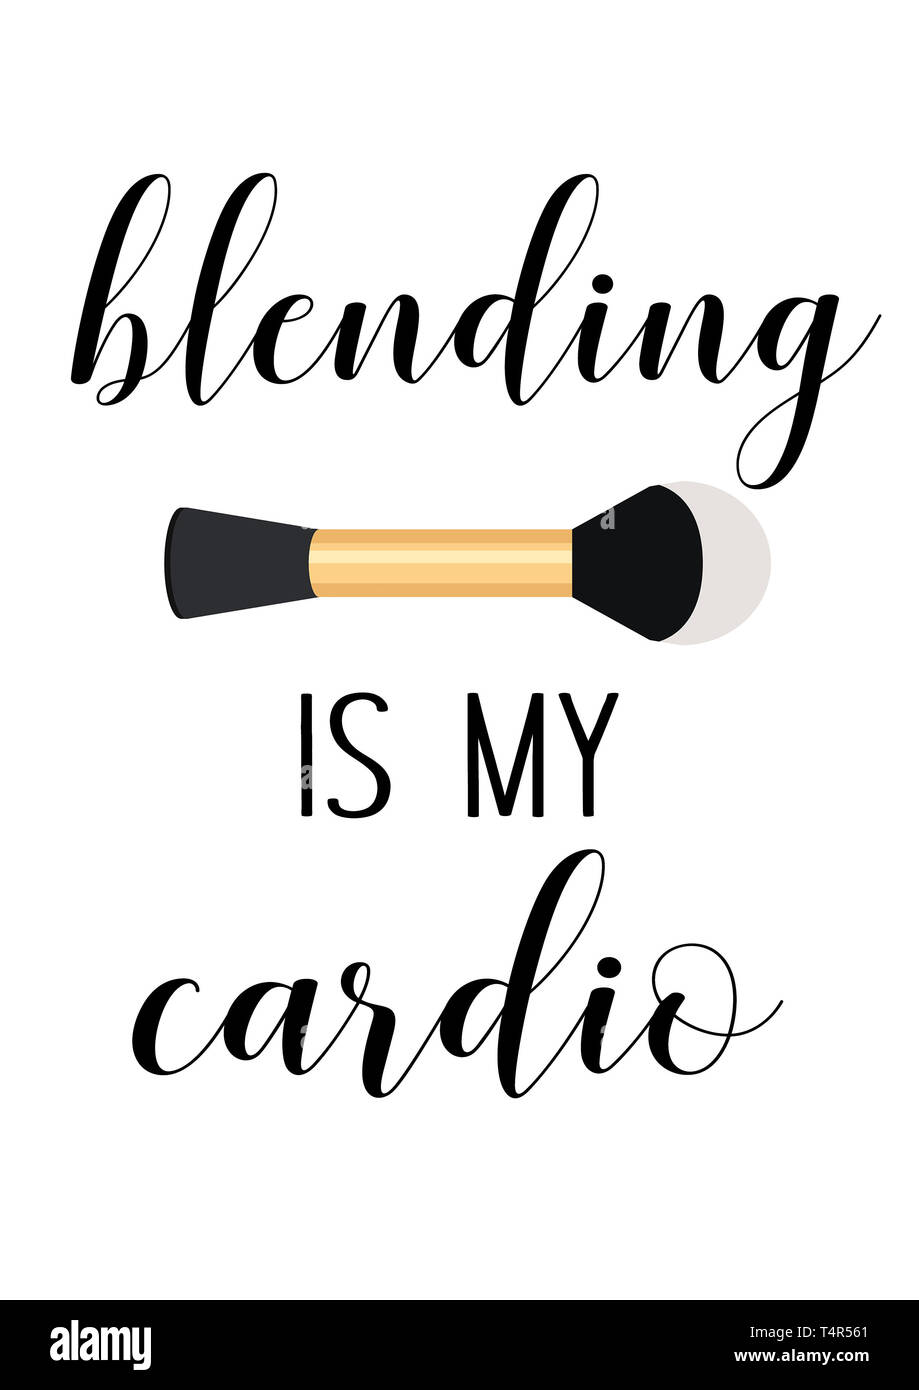 blending is my cardio funny makeup quote Stock Photo - Alamy